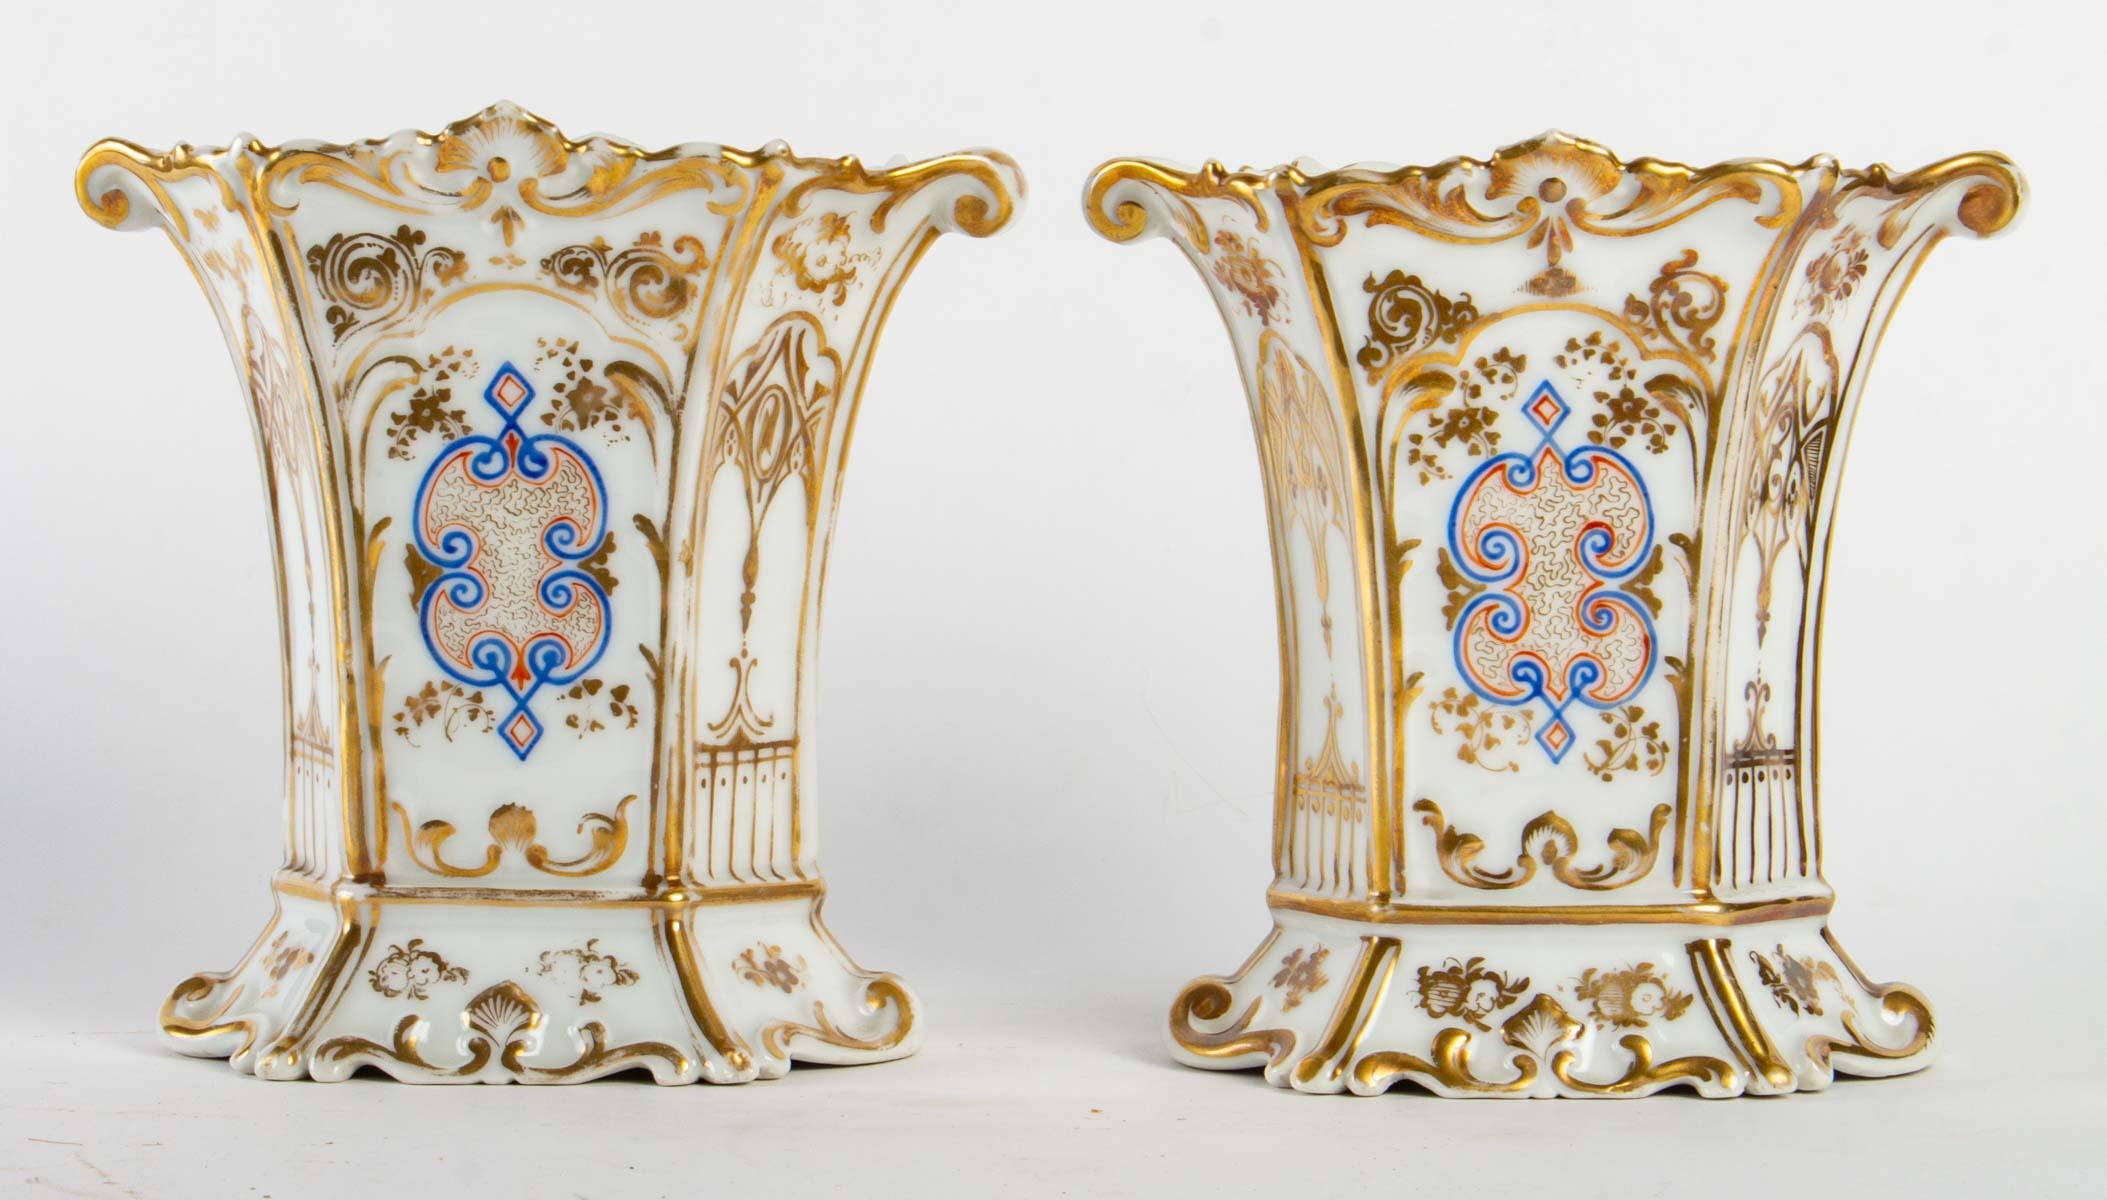 Pair of small vases, Paris in the taste of Boyeux, early 19th century, Charles X period, 1820.
Measures: H: 18.5, W: 20 cm, D: 11cm.